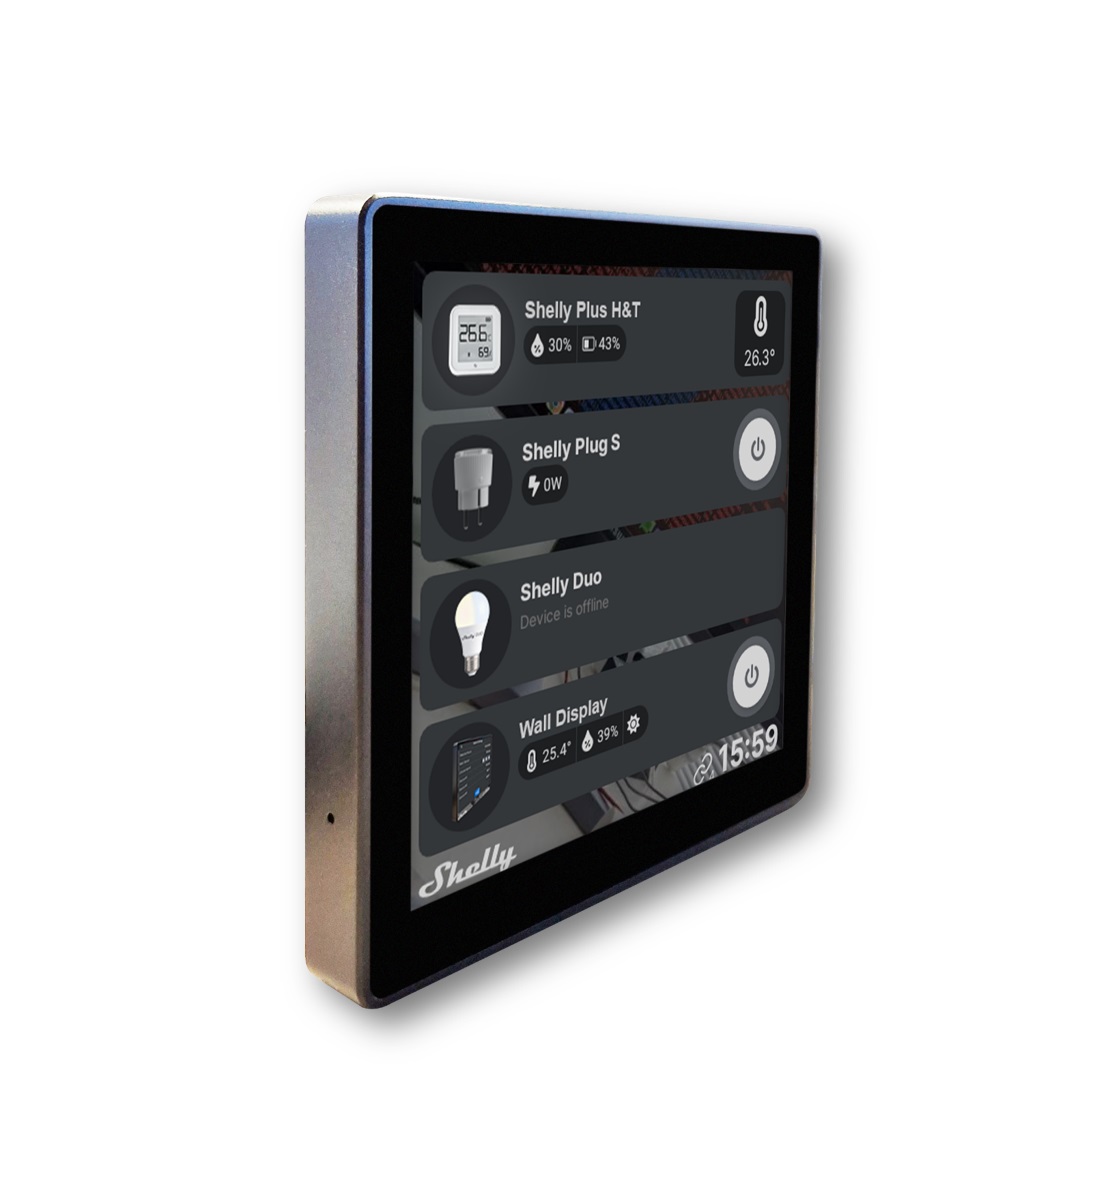 Shelly Wall Display WLAN Wand - Touchdisplay mit Android, Farbe: weiß